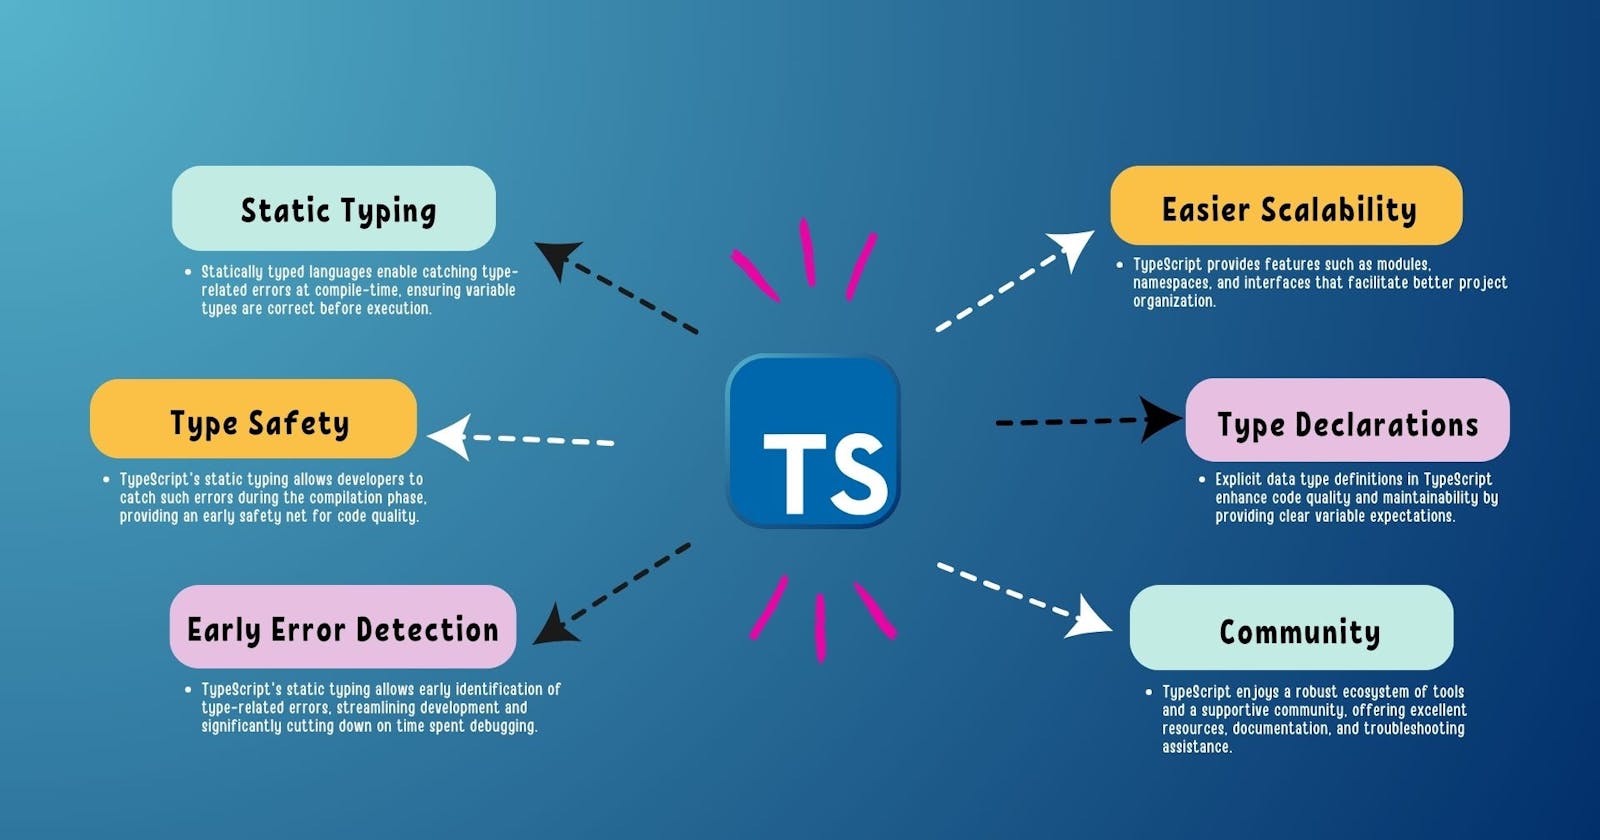 Why Should TypeScript Be Used Instead of JavaScript?